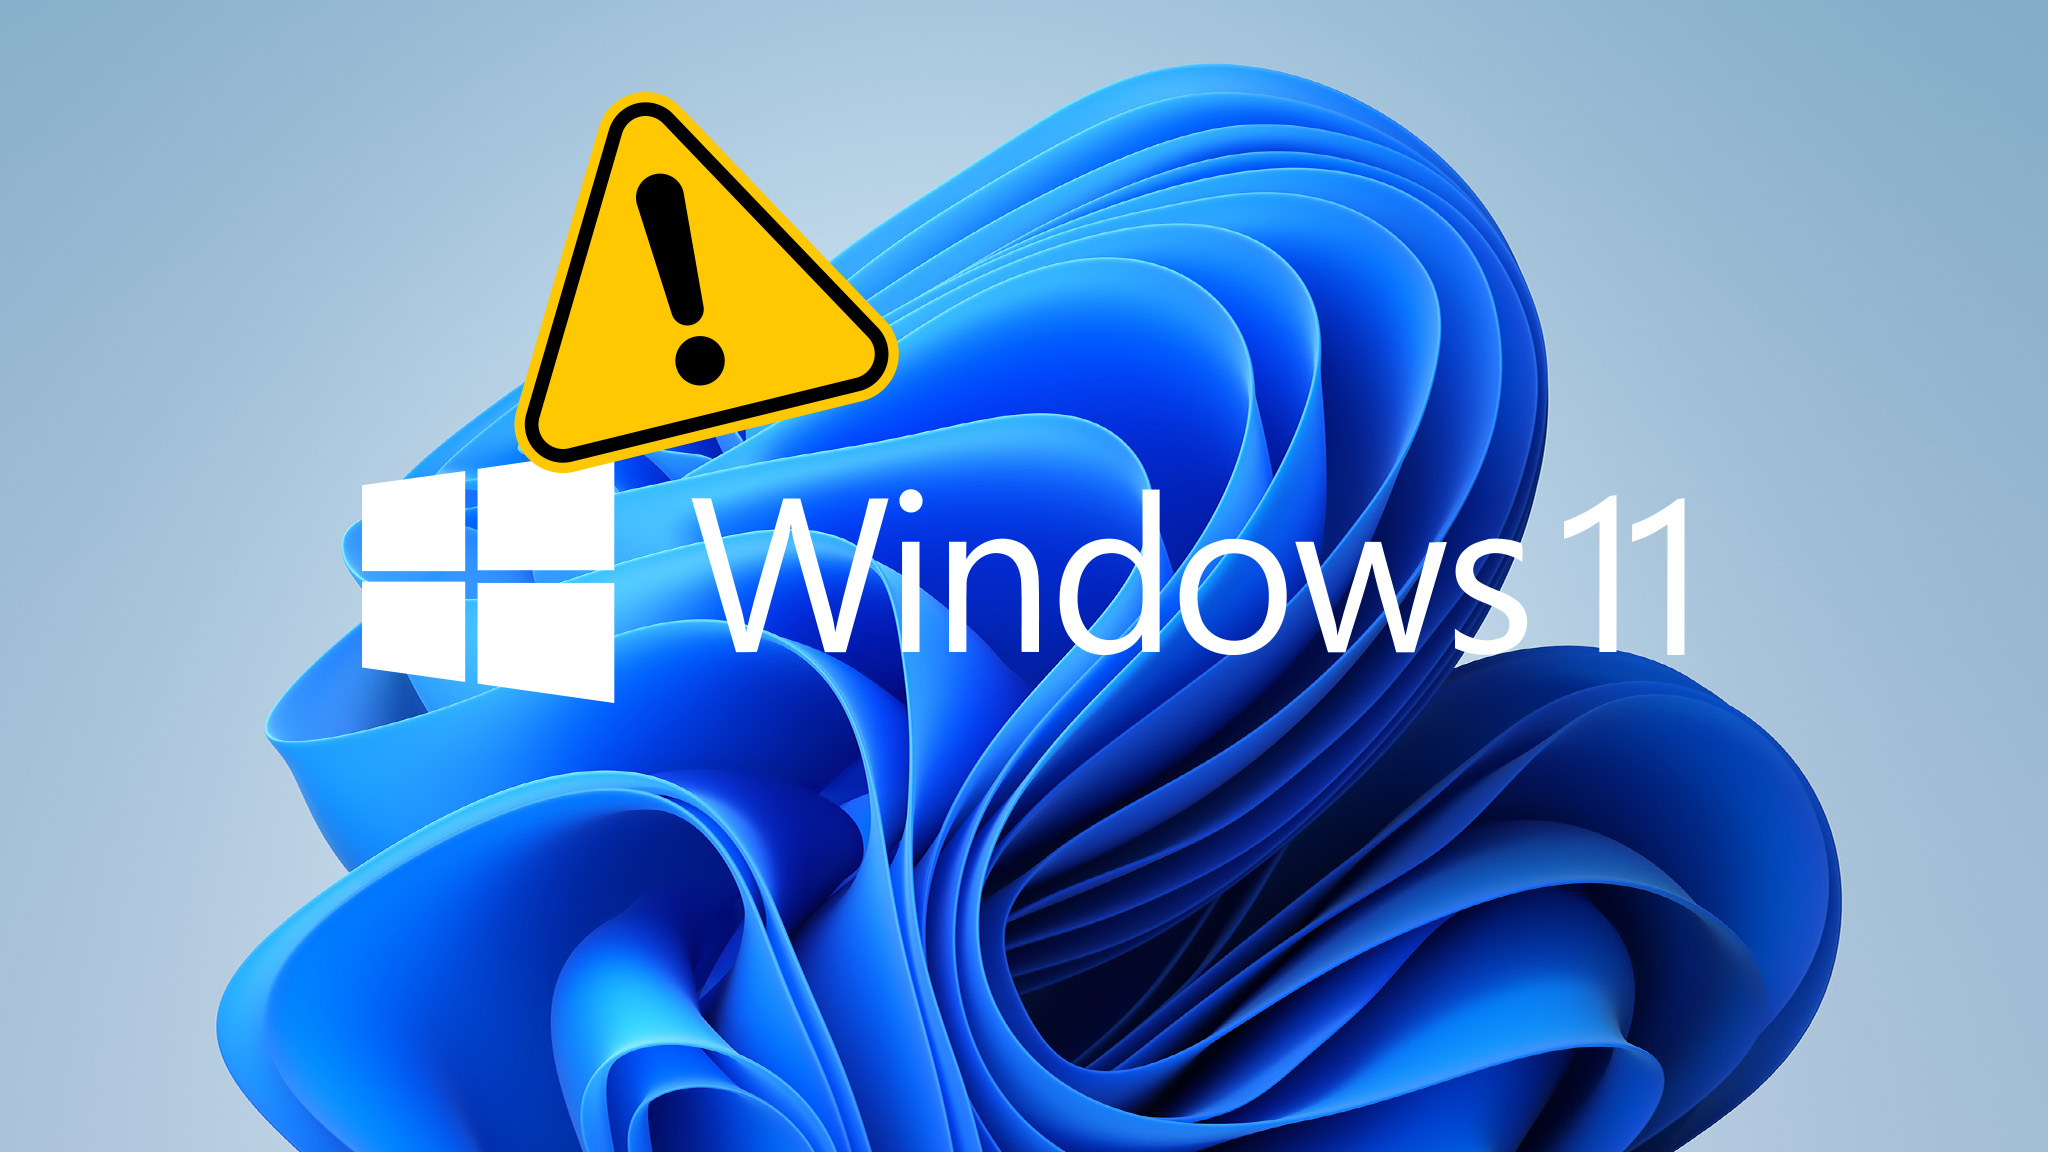 Windows 11 Users are Facing Problems After Updating Their PCs